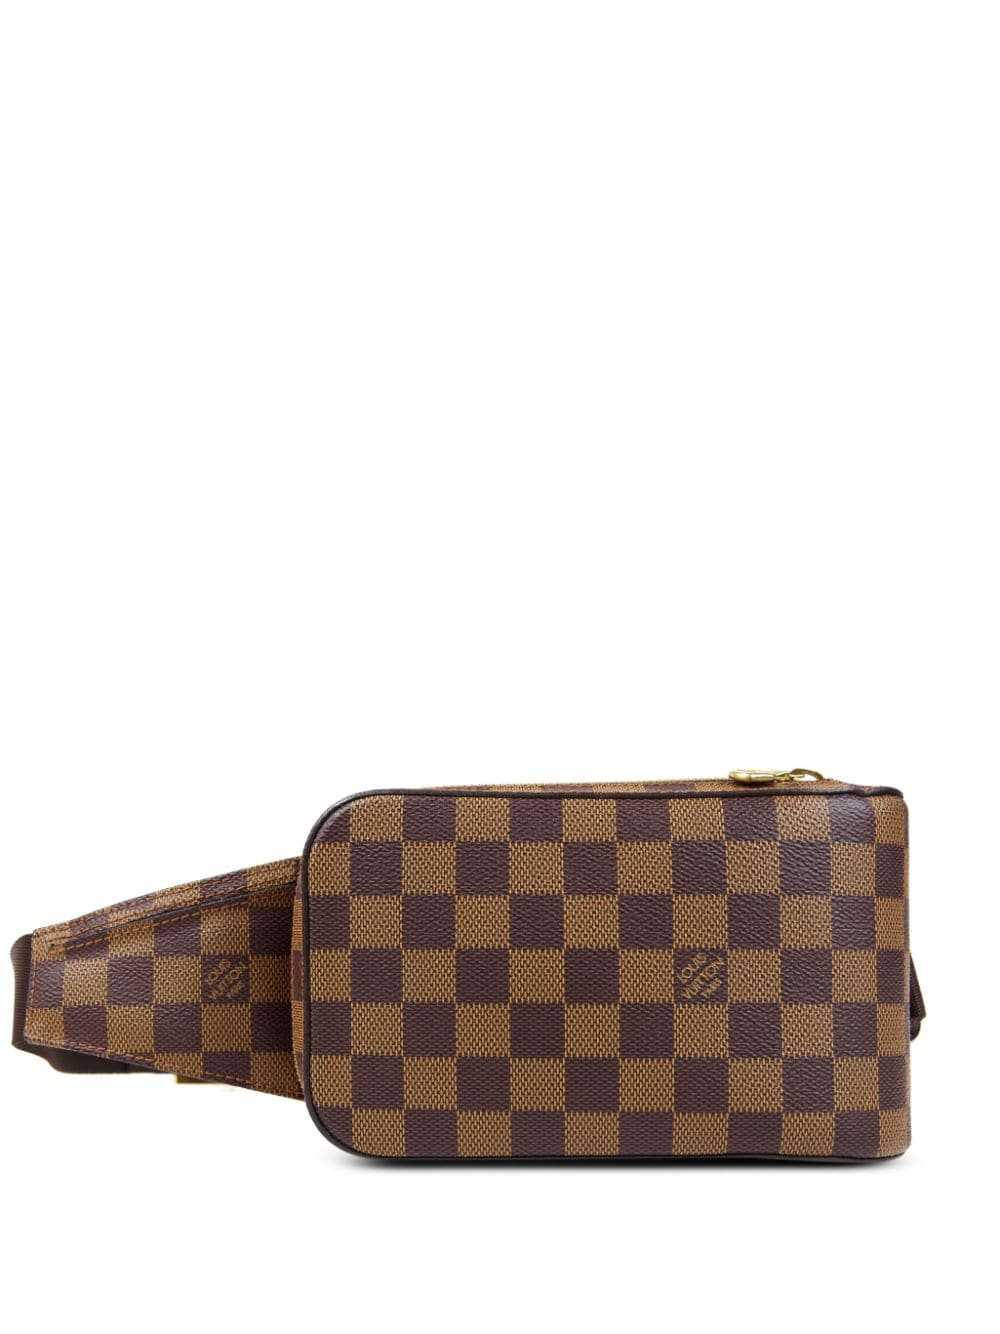 Louis Vuitton 2015 pre-owned Damier Infini District MM crossbody